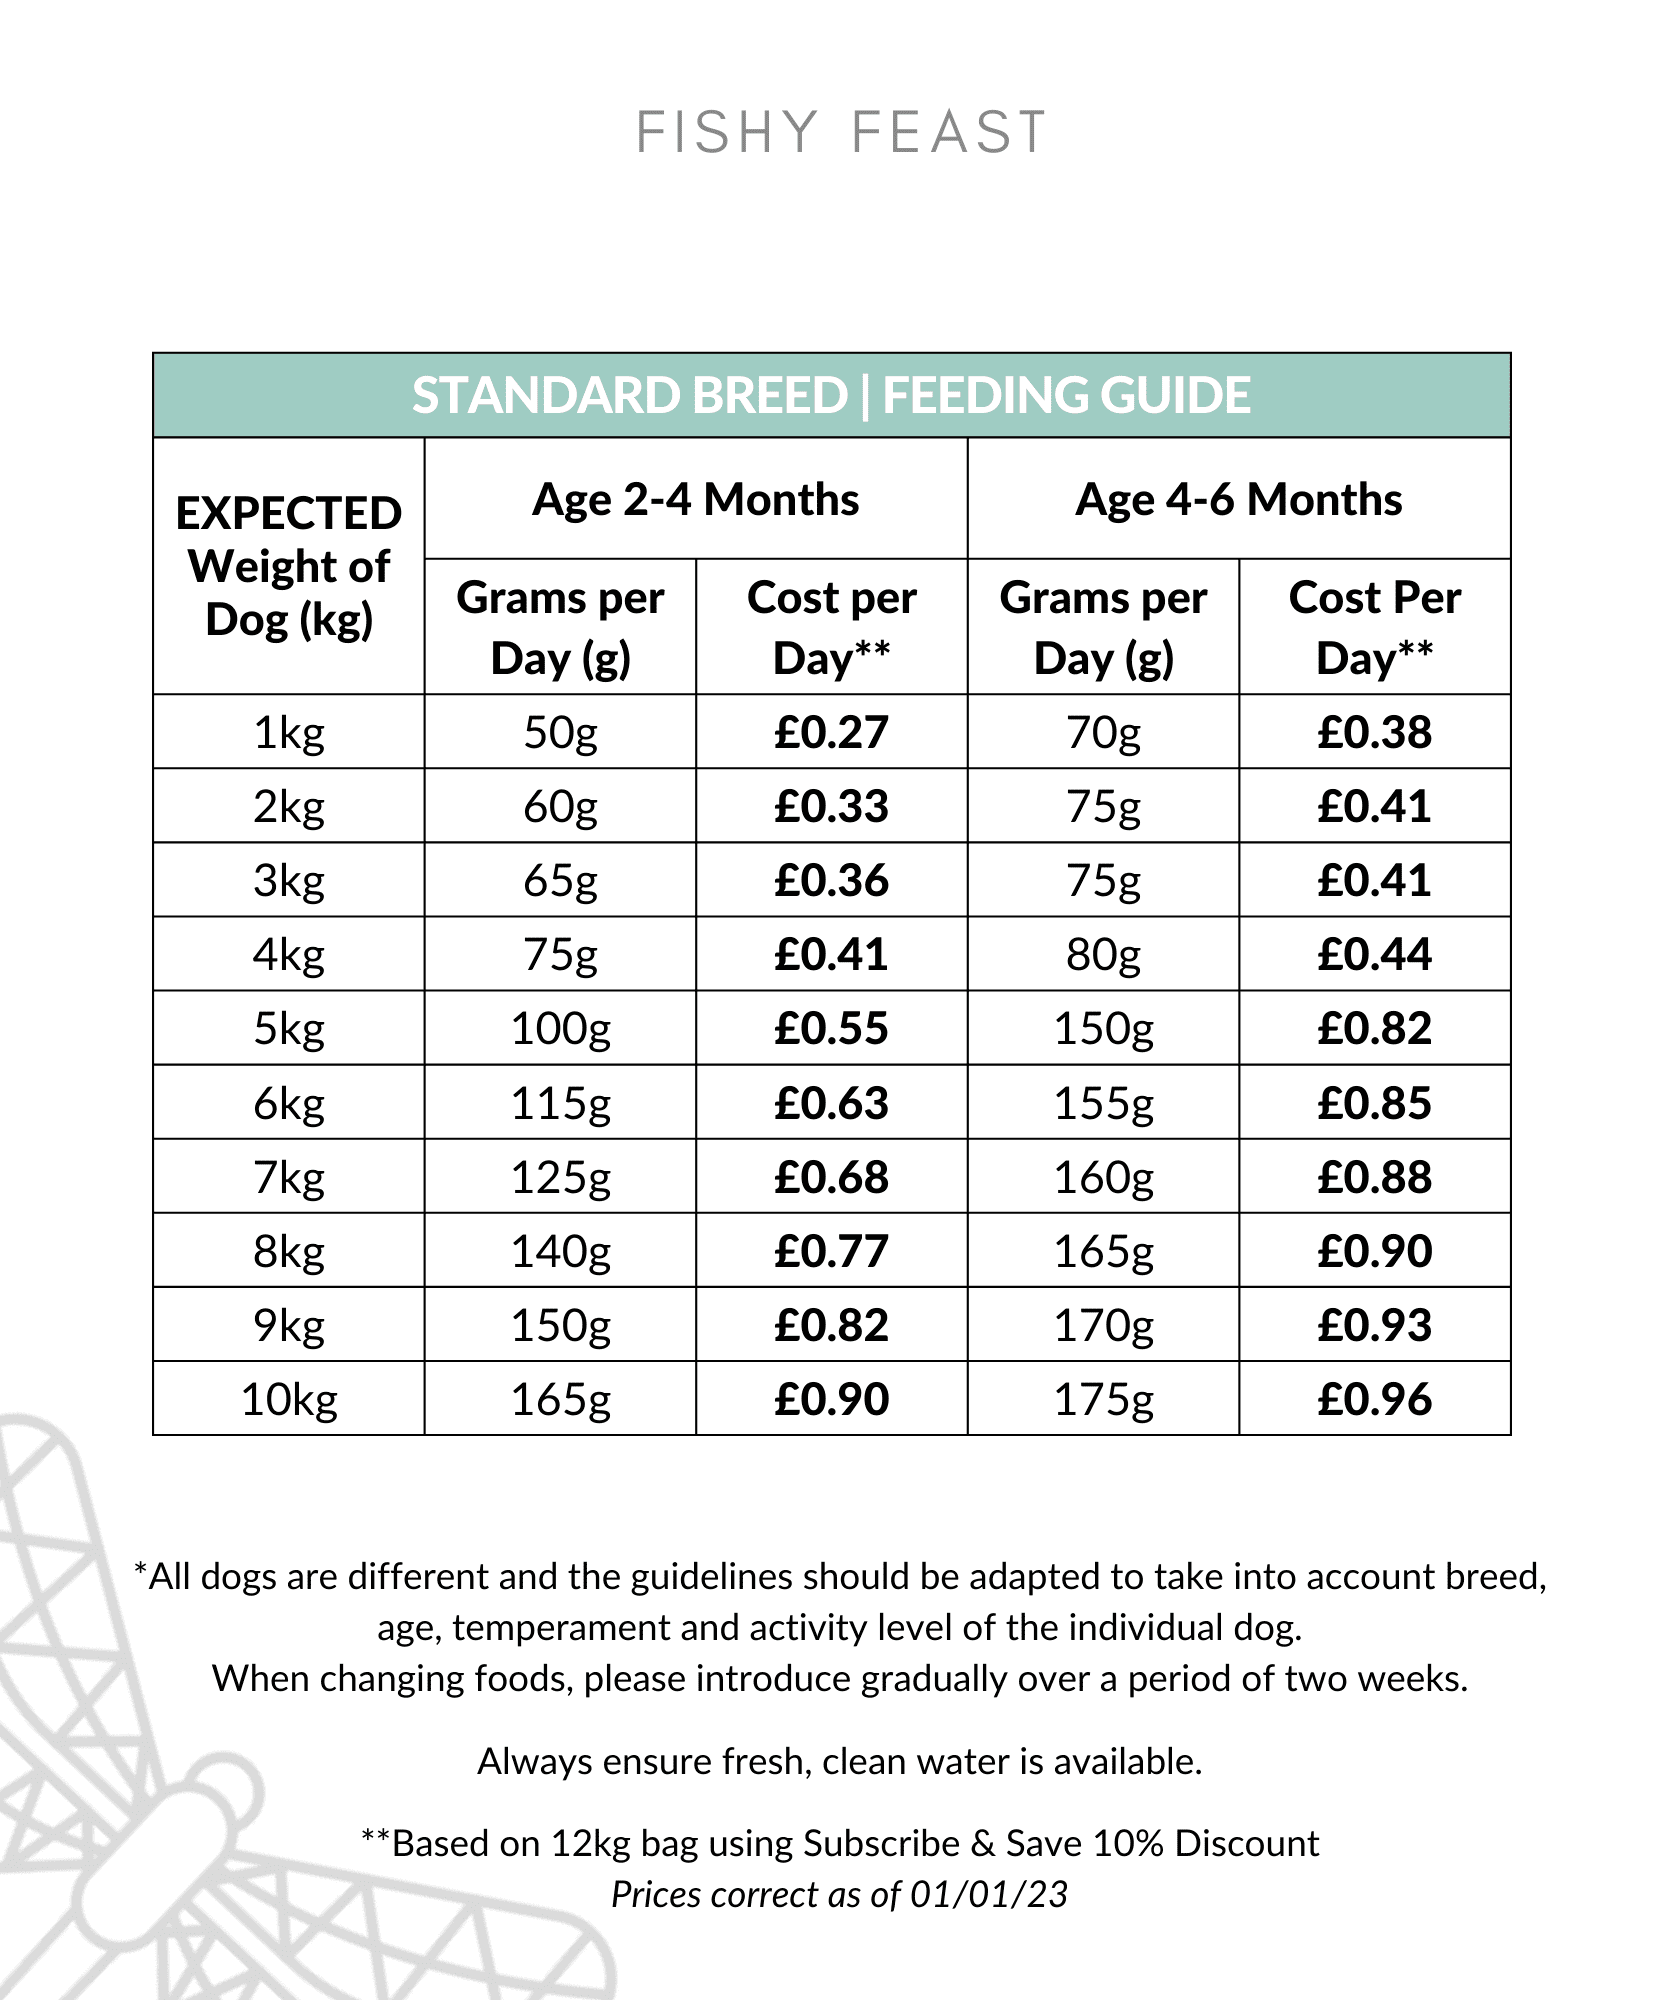 Fishy Feast feeding guide 0-10kg up to 6 months